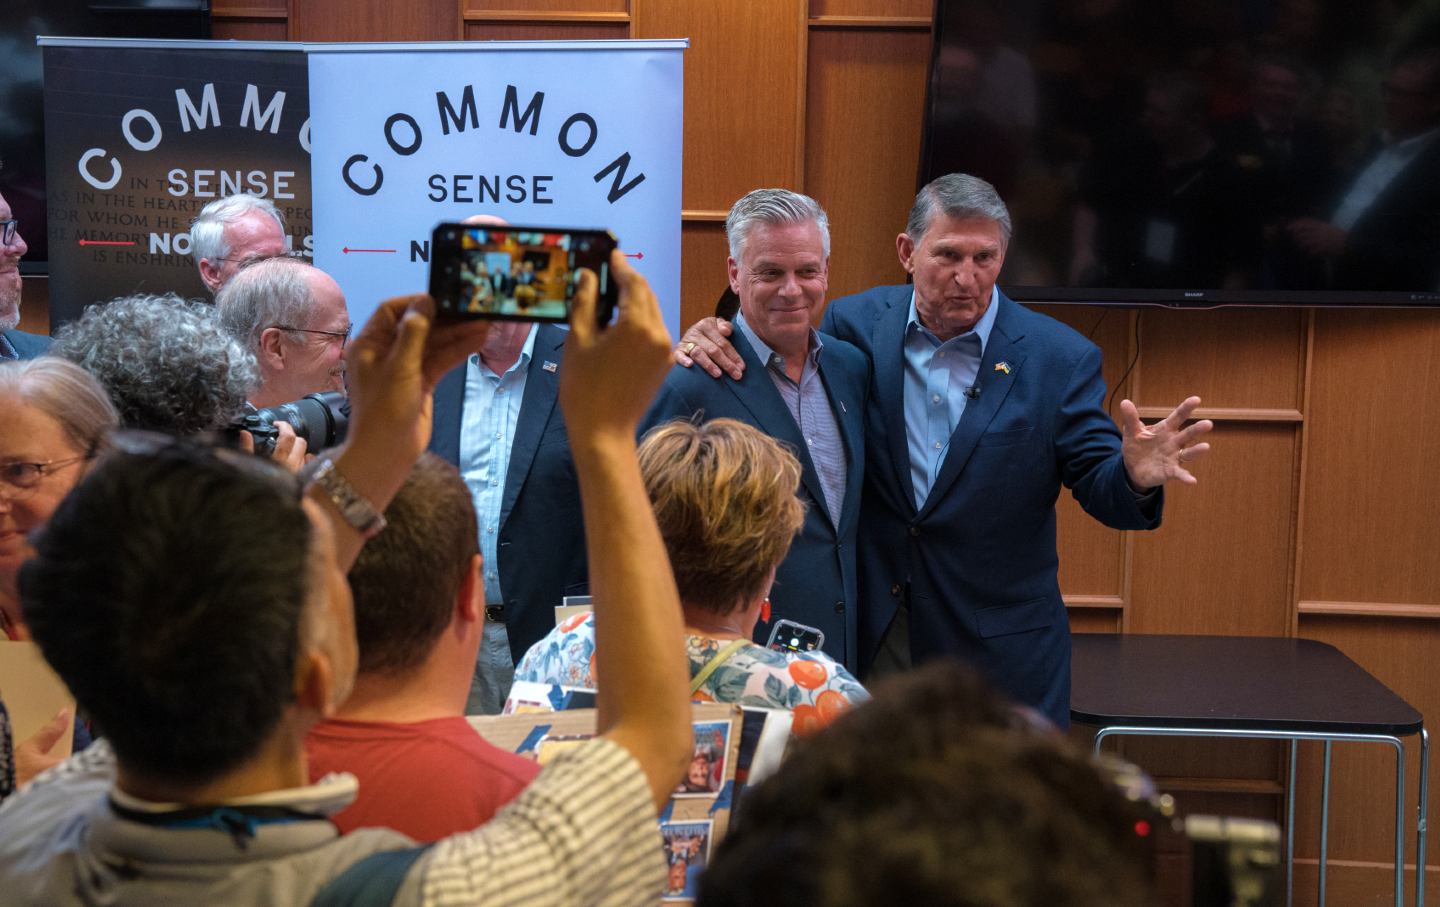 Senator Joe Manchin III (D) and former Utah governor Jon Huntsman (R) visit an overflow room after co-headlining the Common Sense Town Hall, an event sponsored by the bipartisan group No Labels, held on July 17, 2023, in Manchester, New Hampshire.